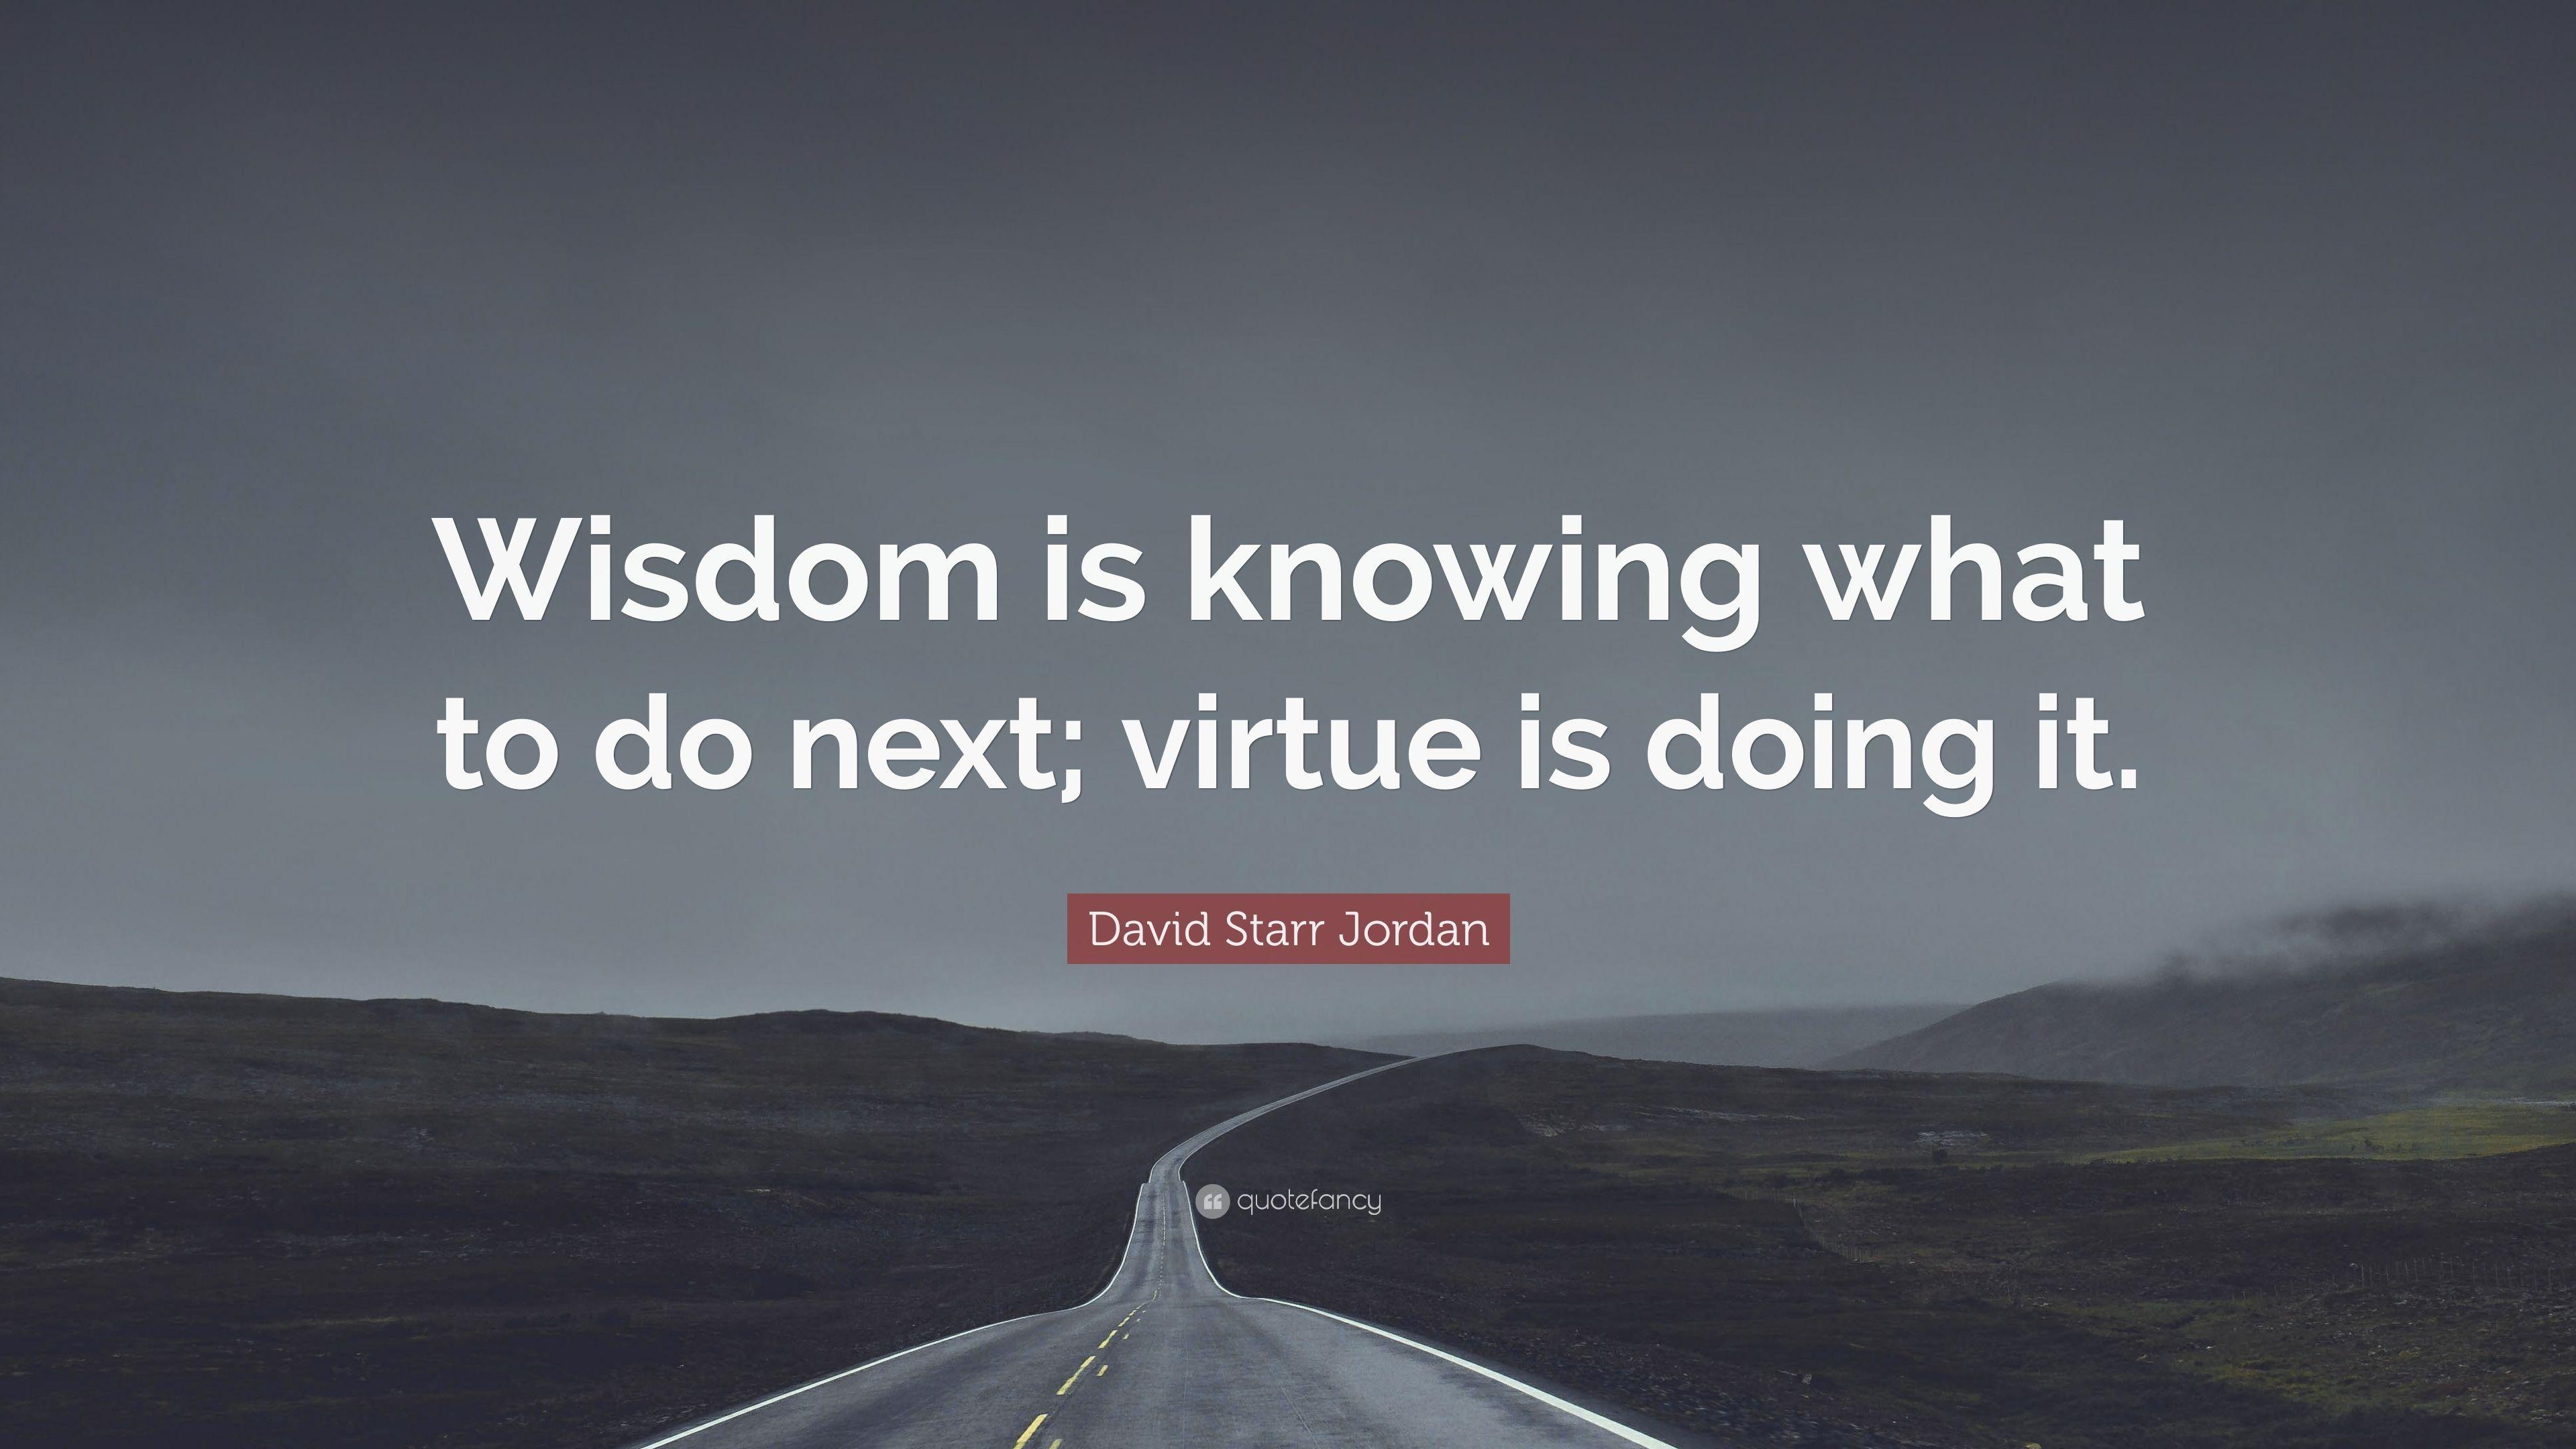 David Starr Jordan Quote: “Wisdom is knowing what to do next